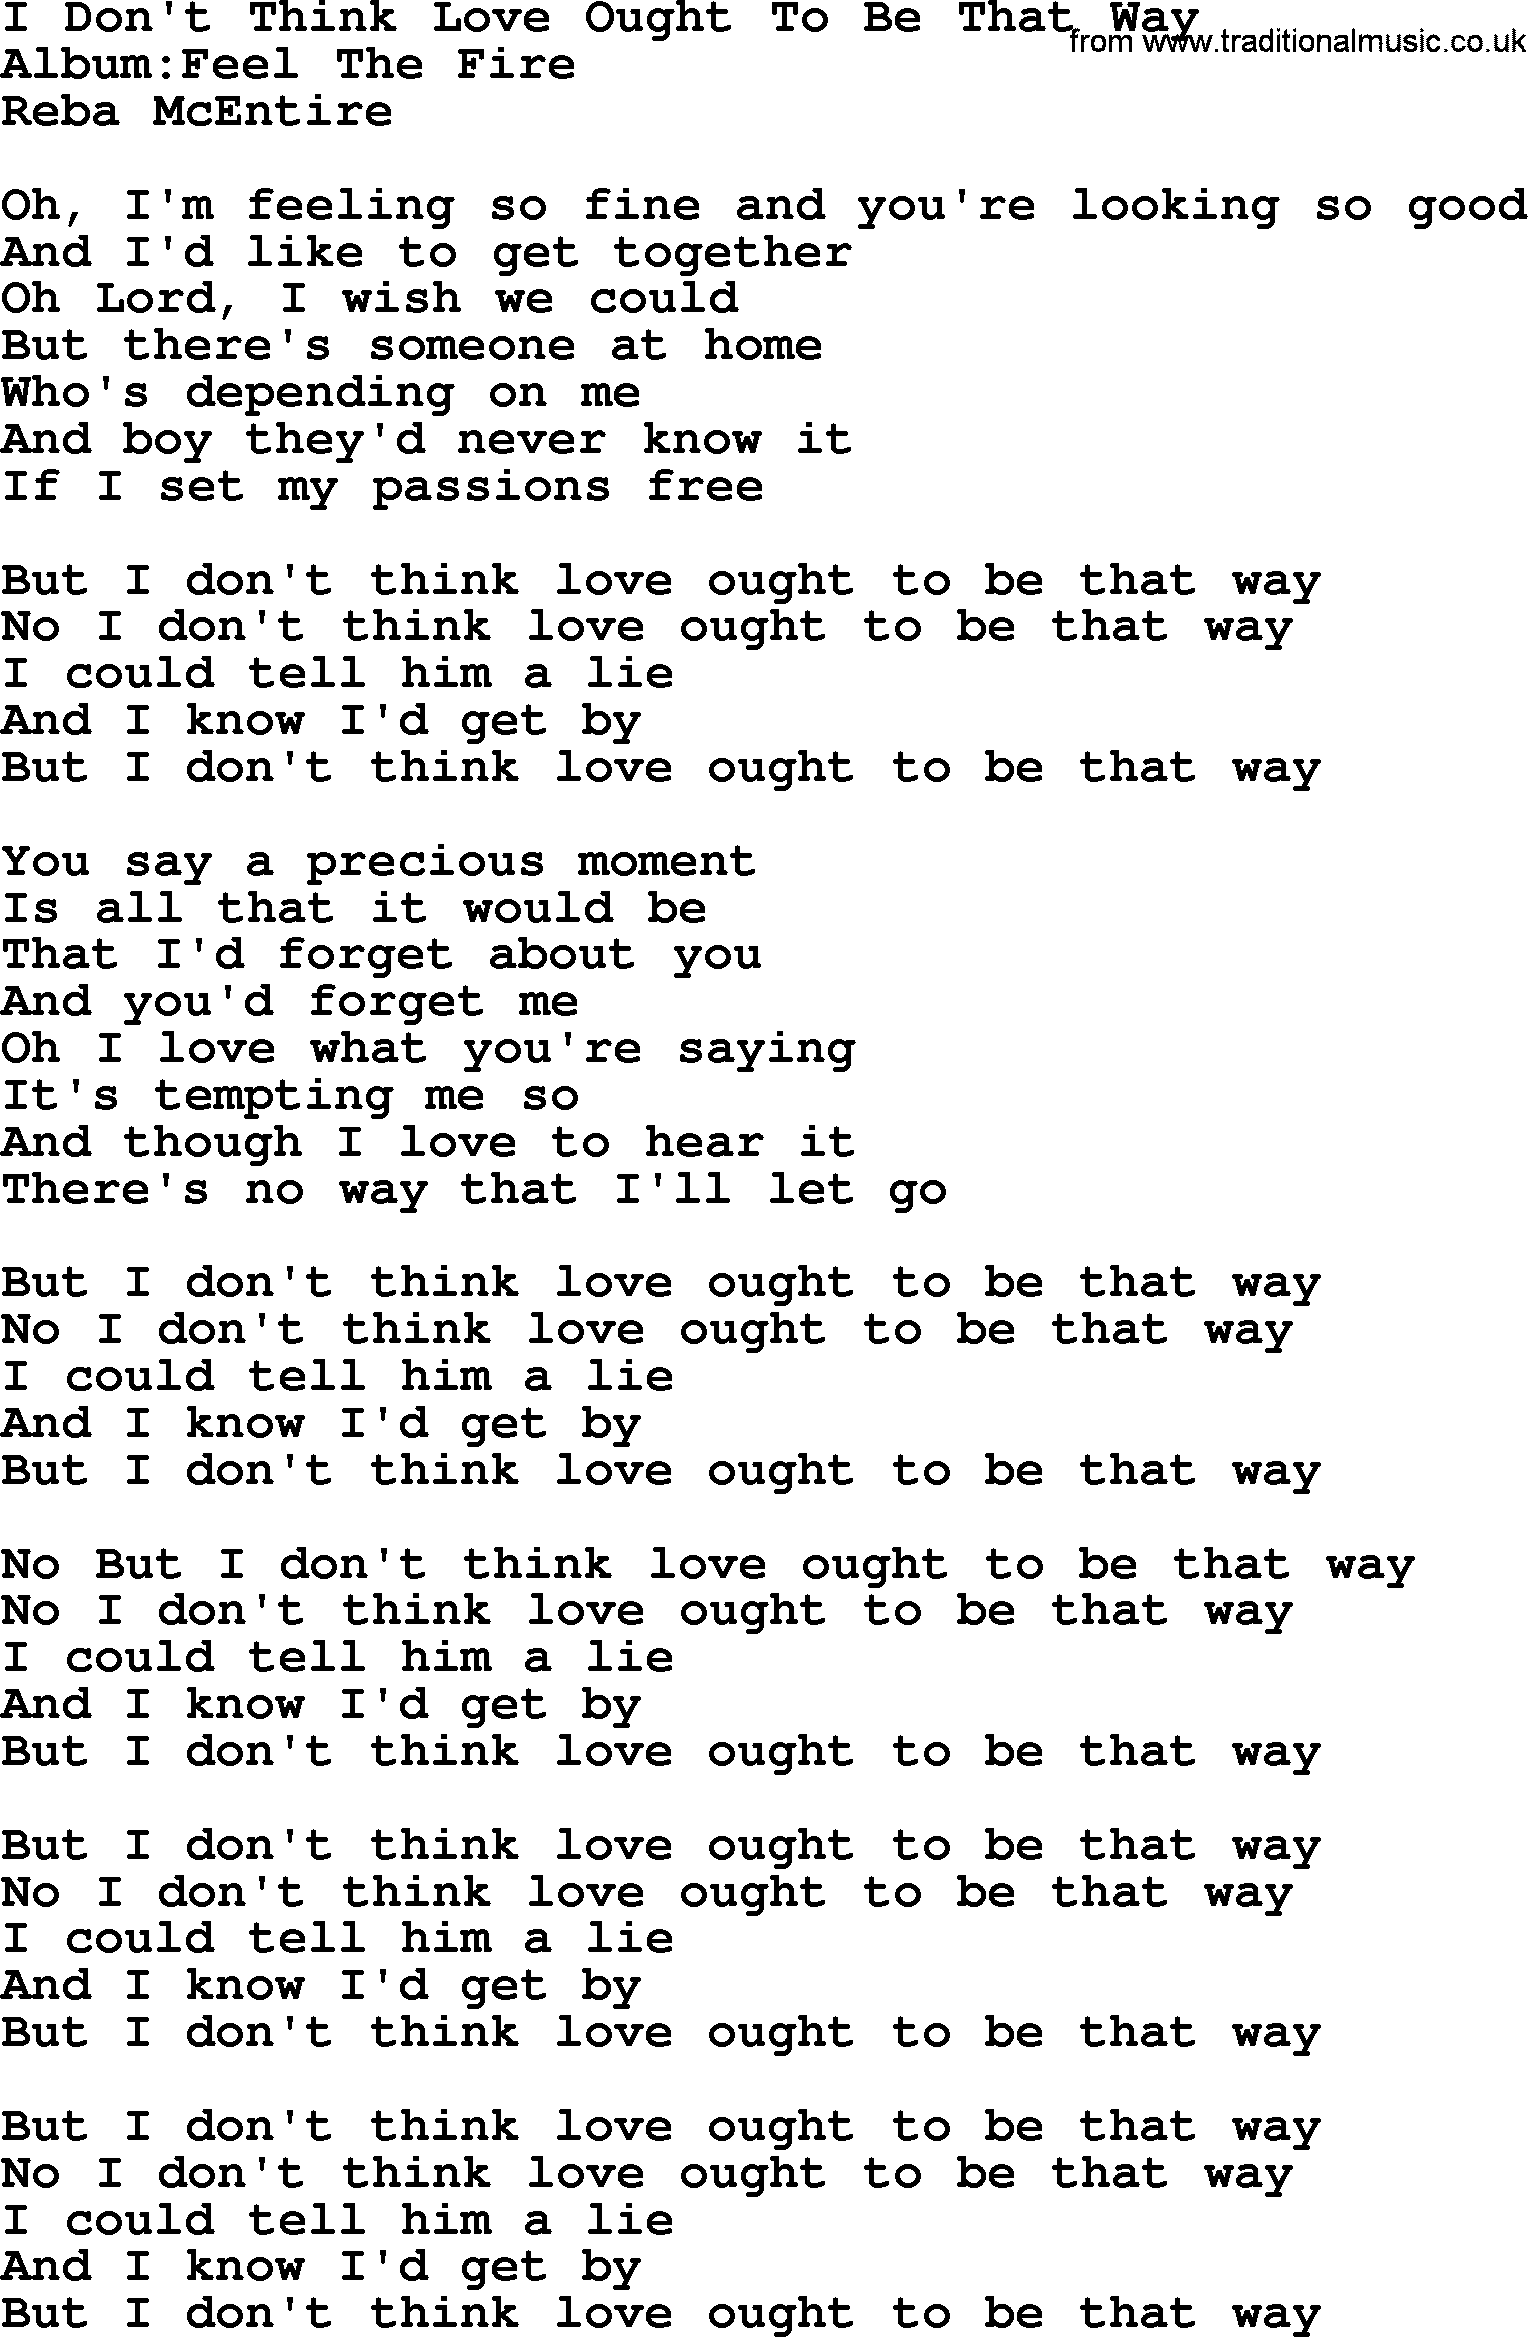 Reba McEntire song: I Don't Think Love Ought To Be That Way lyrics